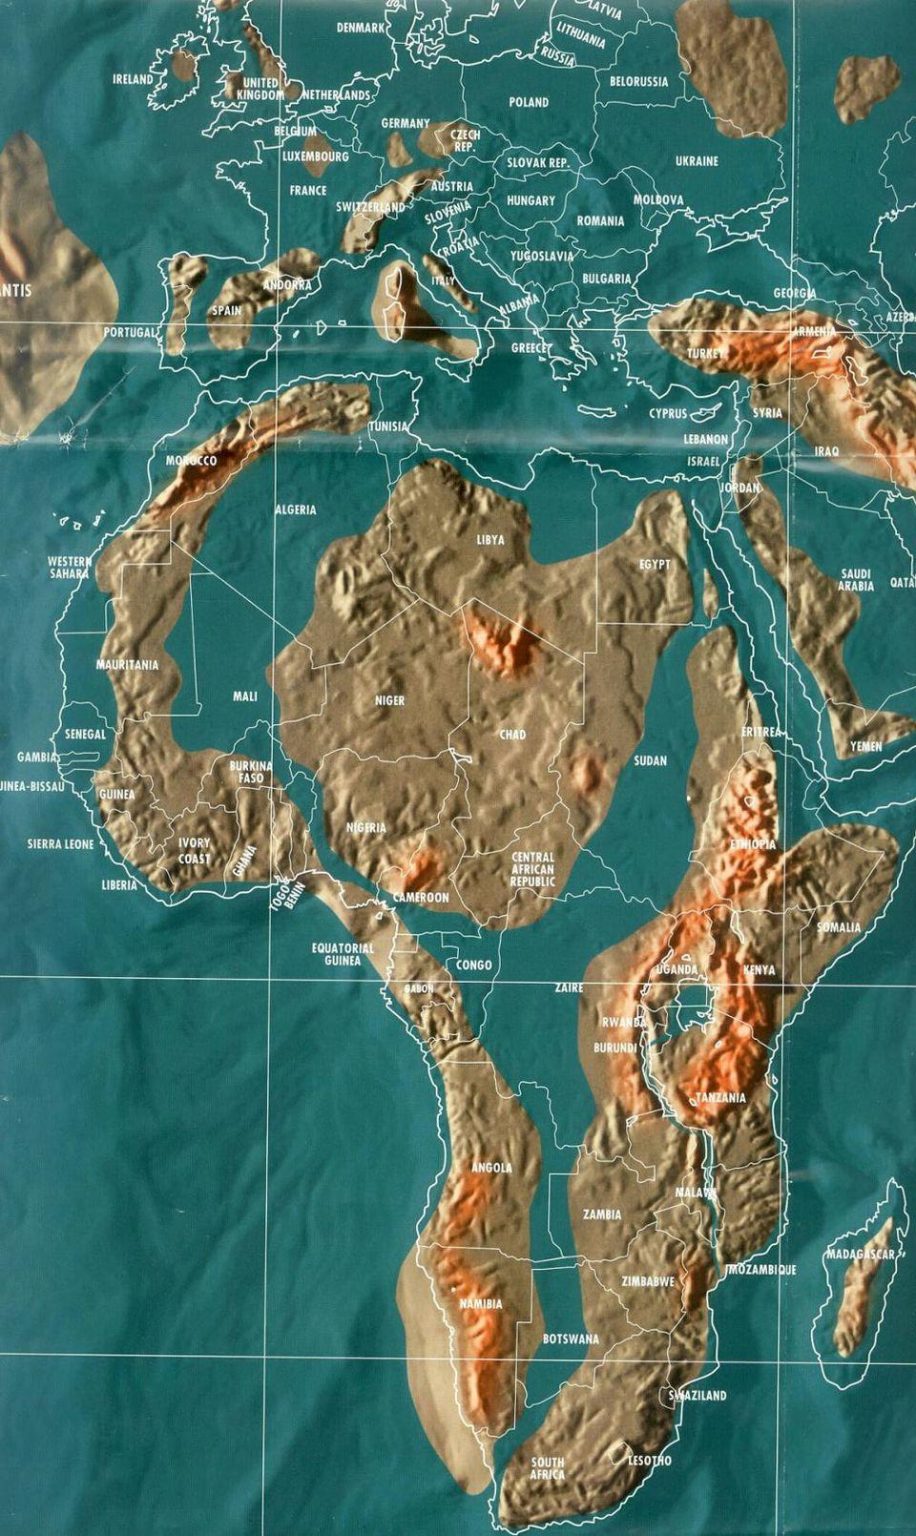 The Doomsday Maps Of The World And The Billionaire Escape Plans